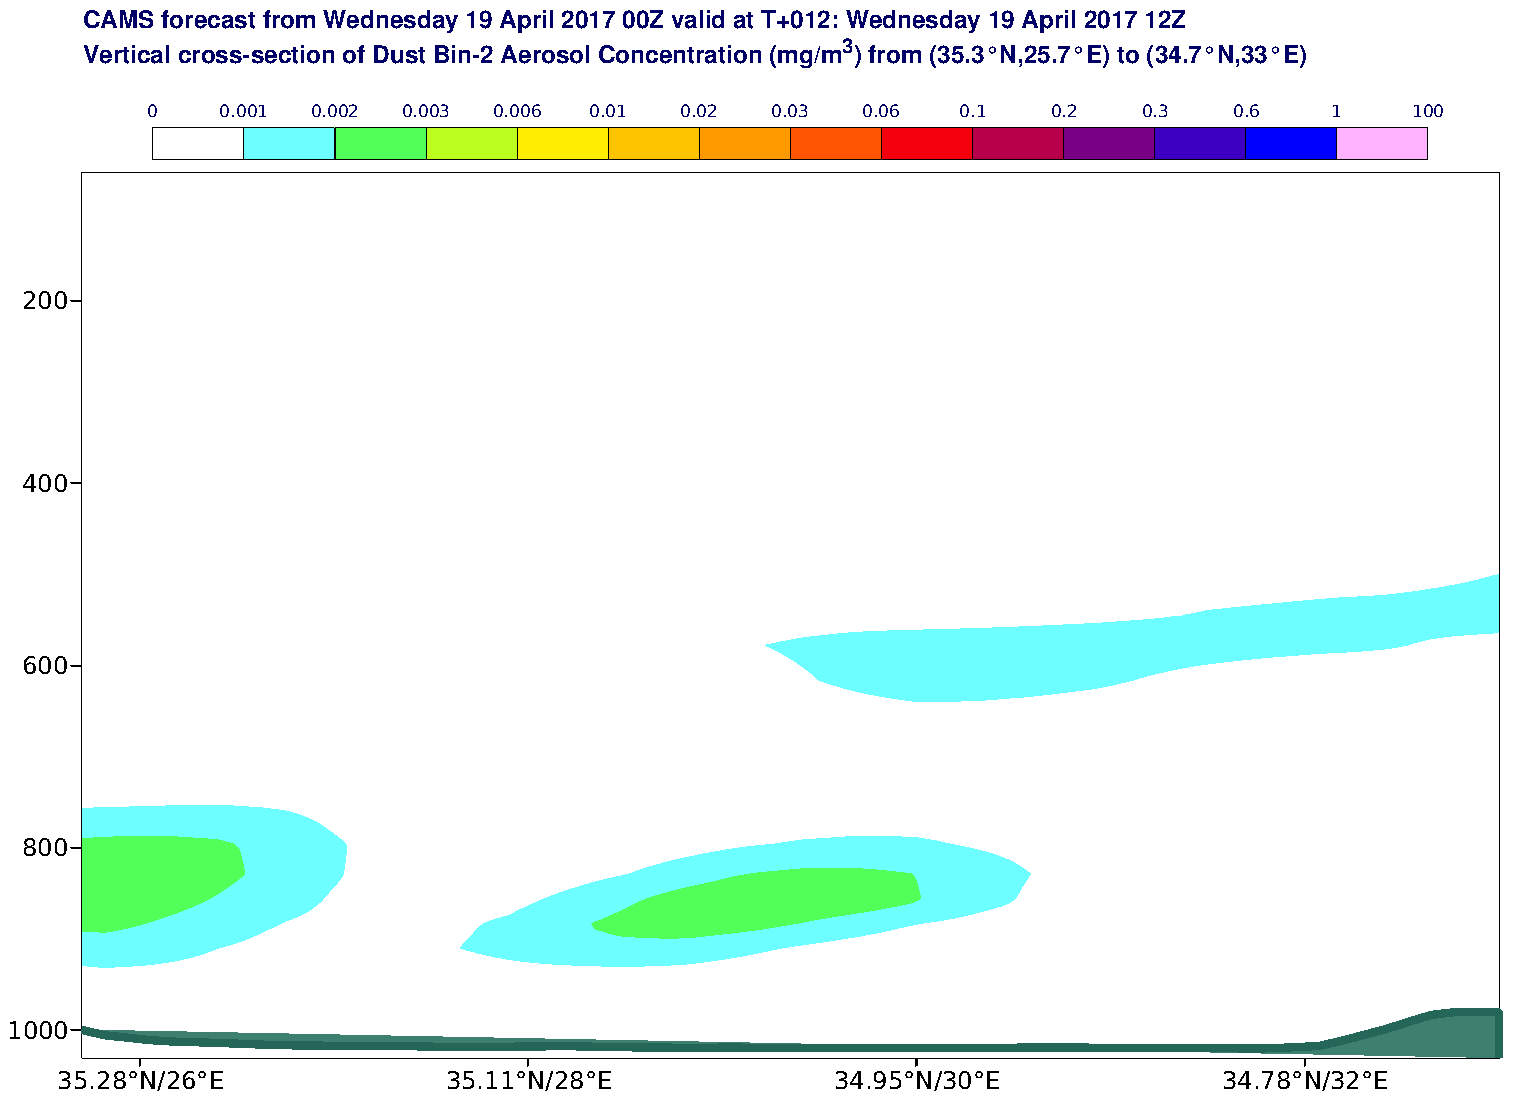 Vertical cross-section of Dust Bin-2 Aerosol Concentration (mg/m3) valid at T12 - 2017-04-19 12:00